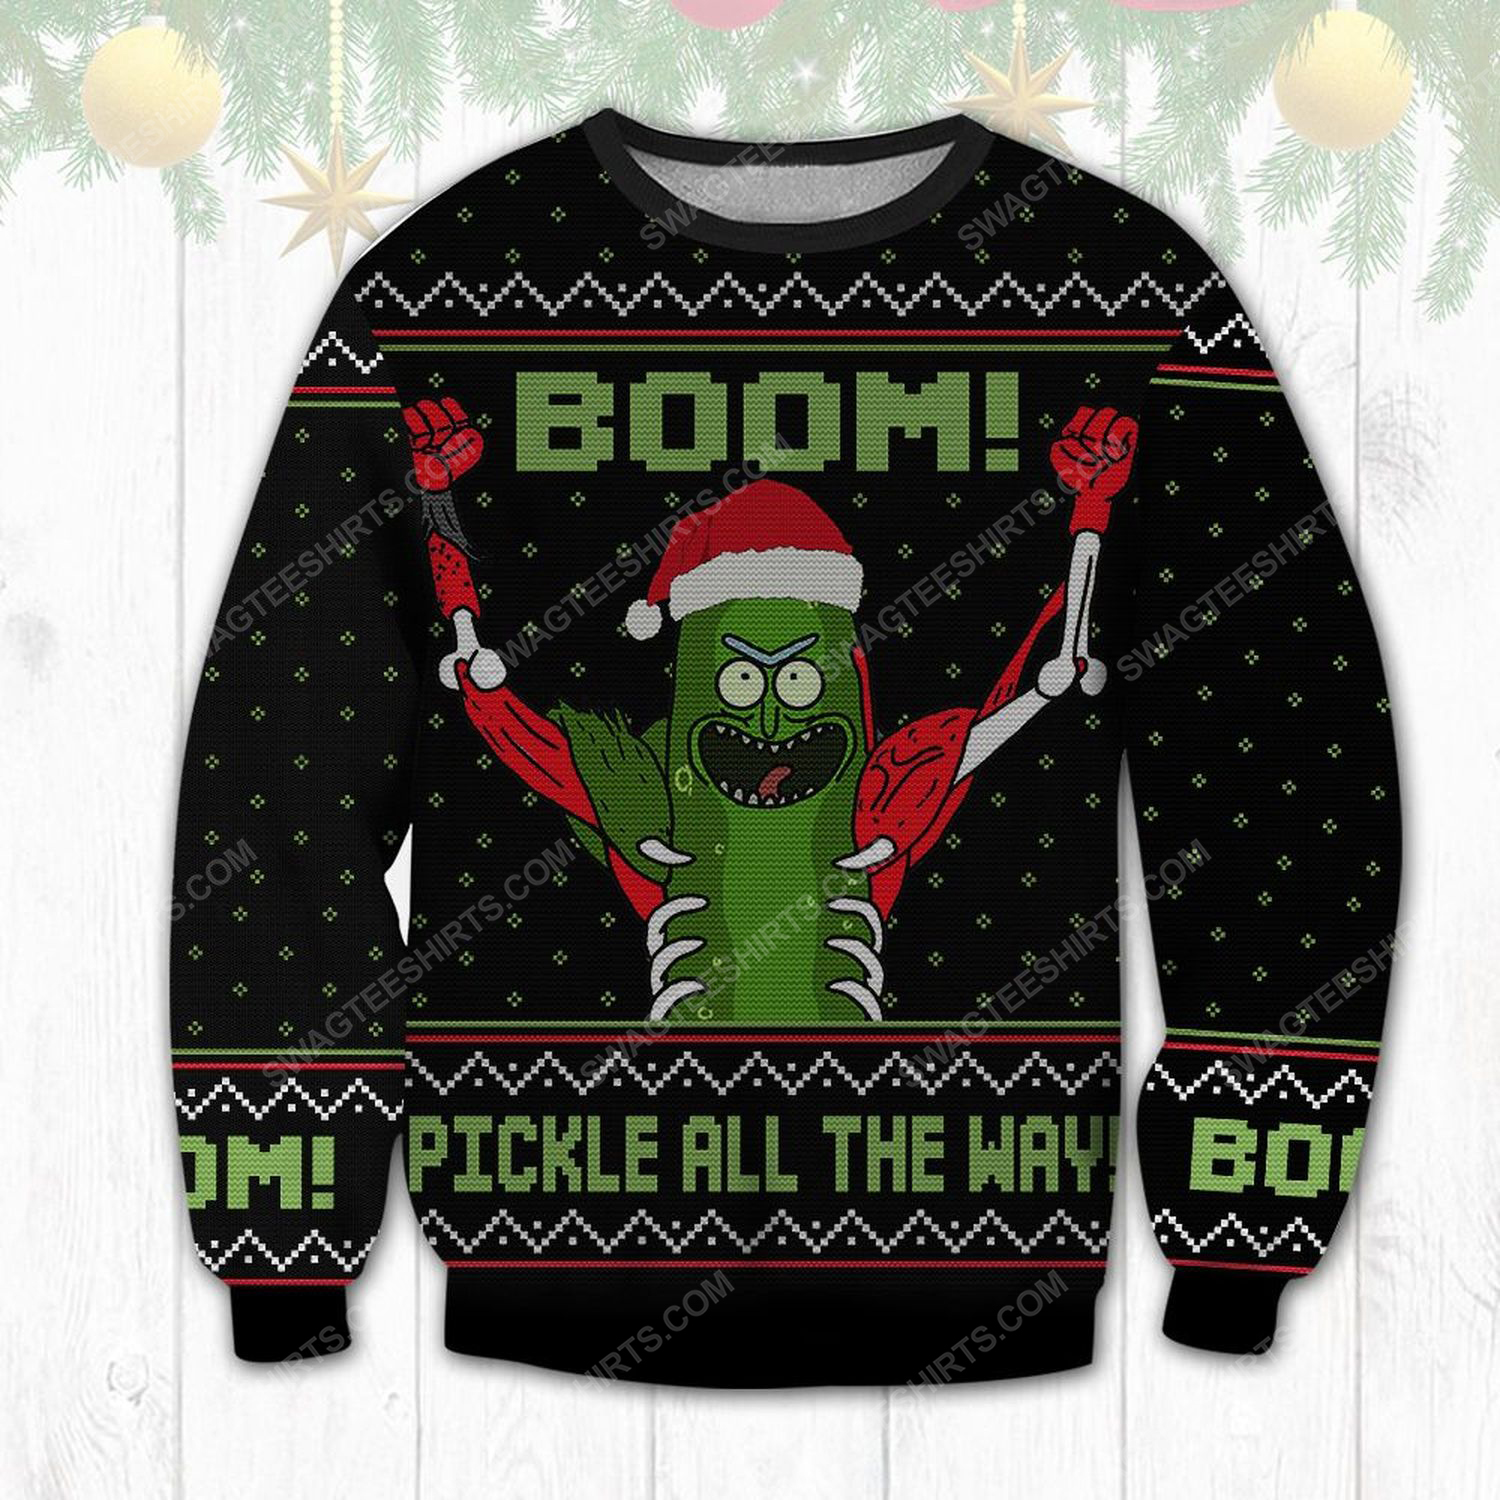 Pickle all the way rick and morty ugly christmas sweater 1 - Copy (2)